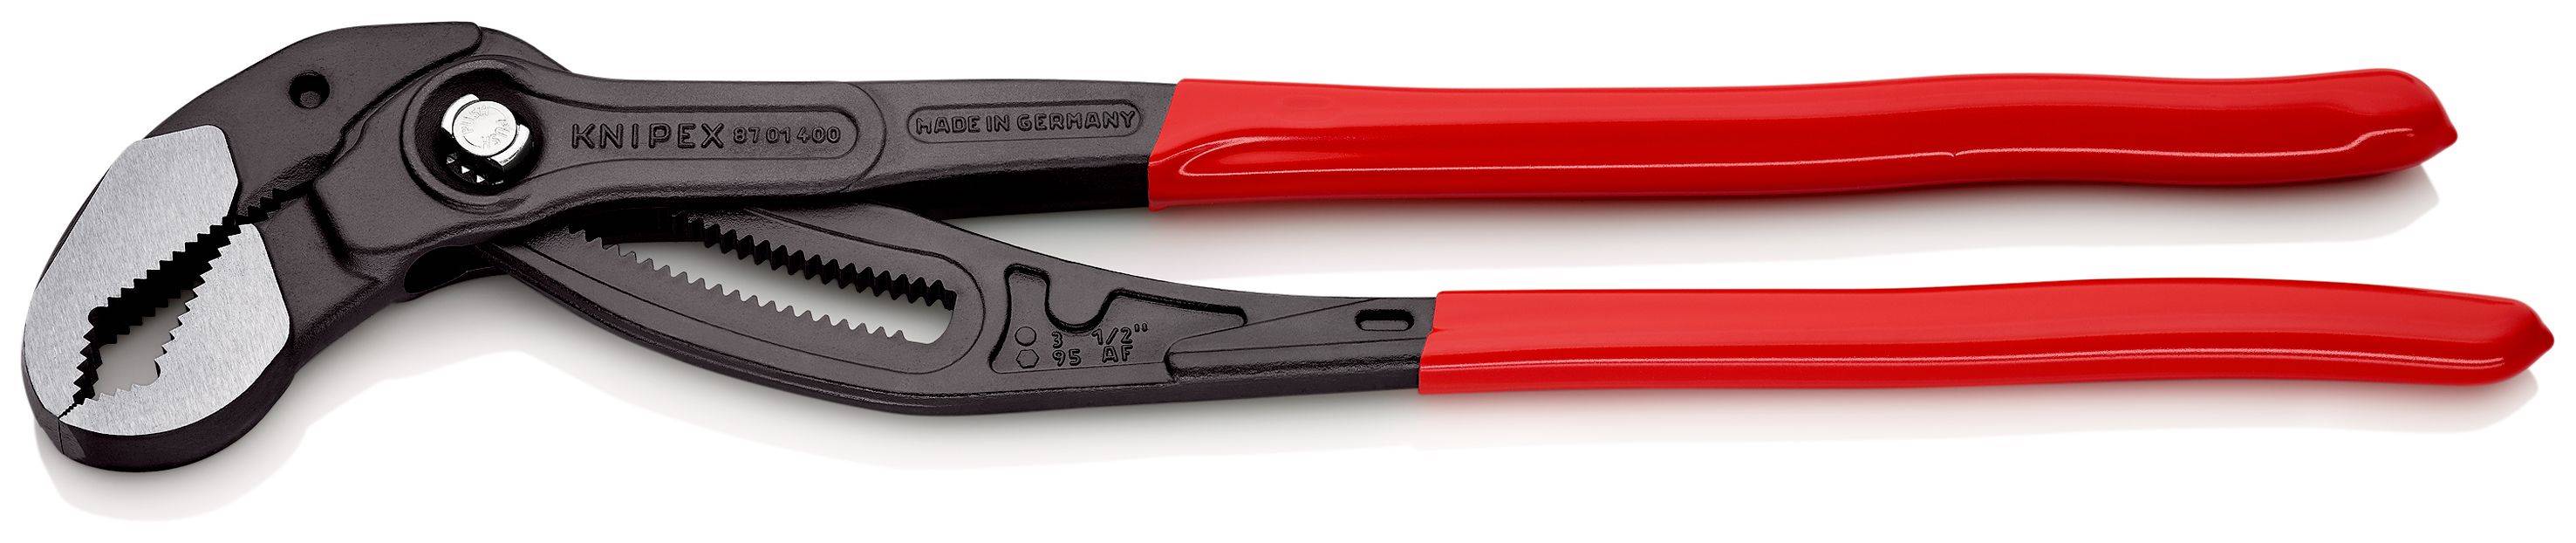 Pince multiprise Knipex - Longueur 400mm